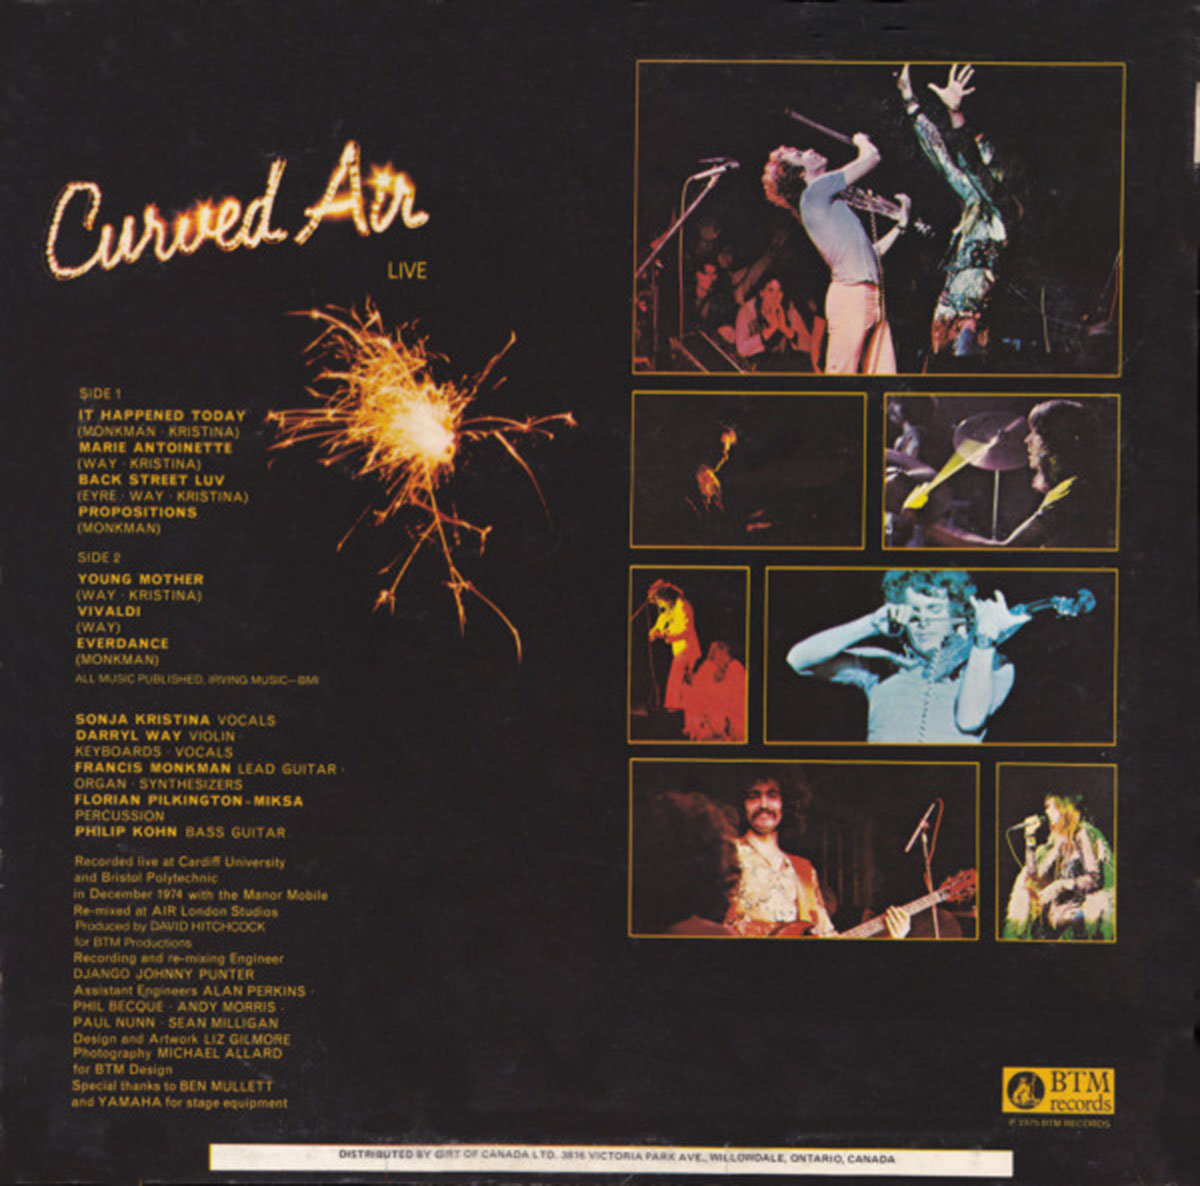 Curved Air – Curved Air Live